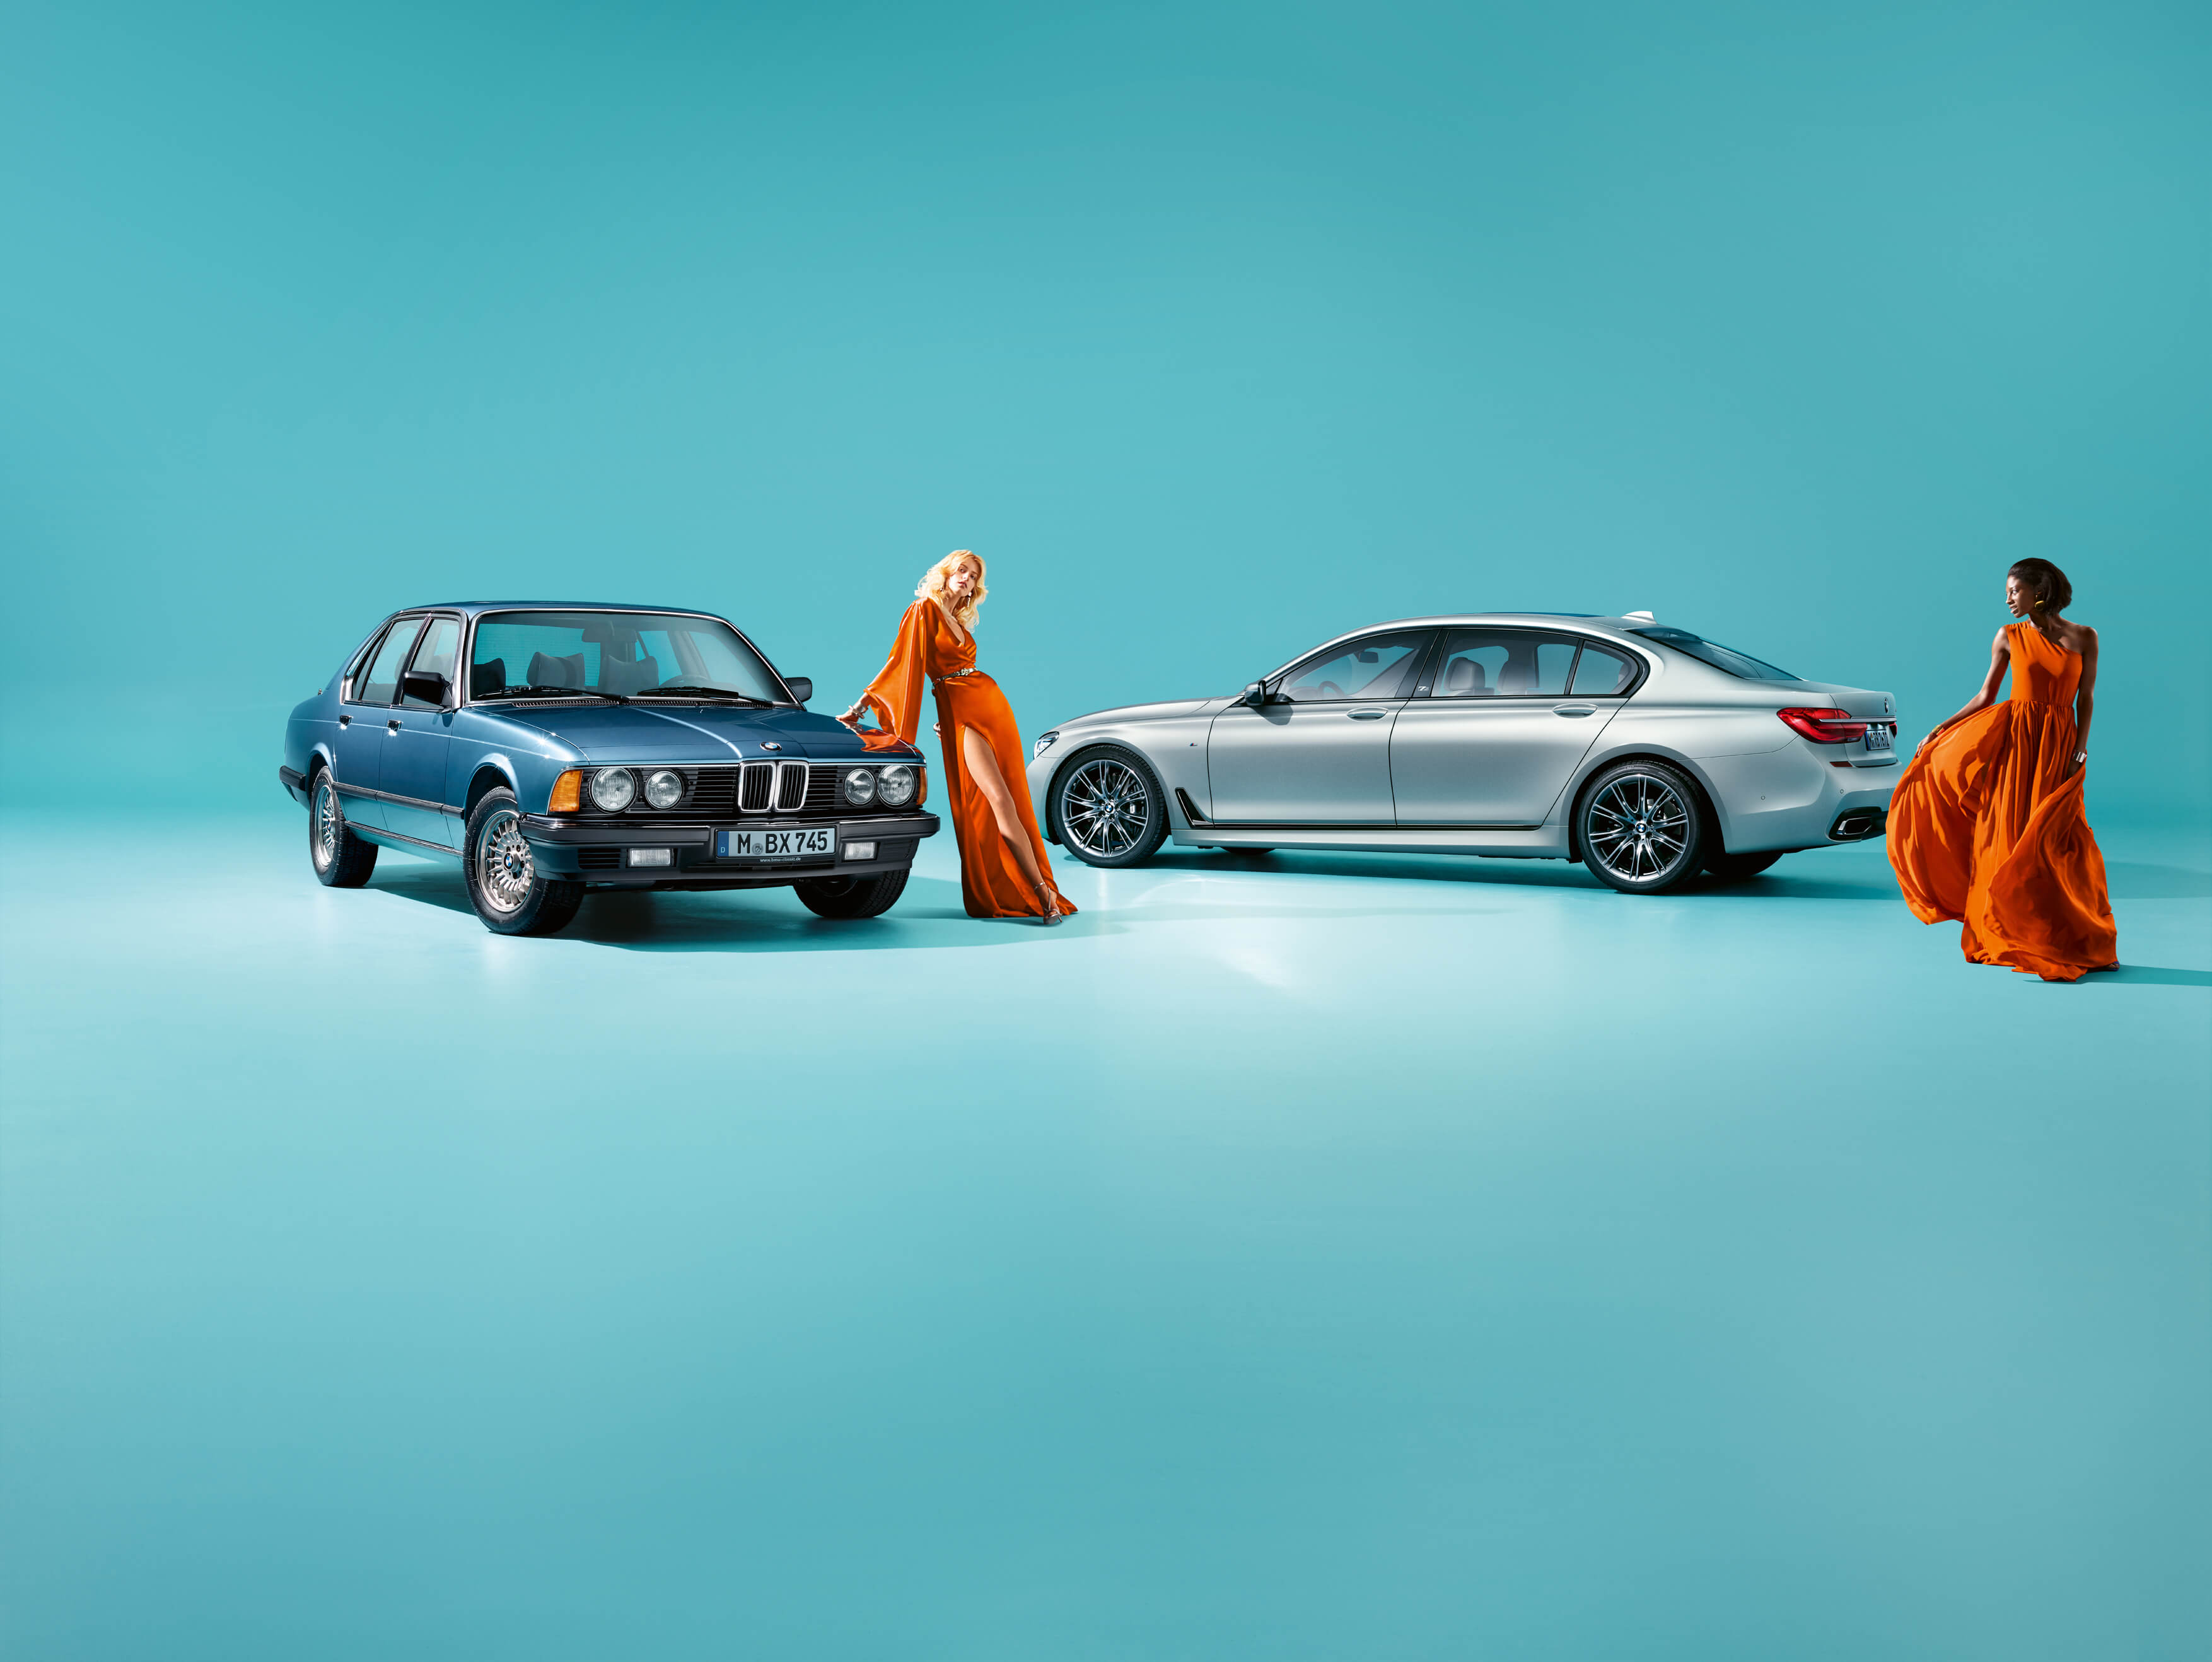 Luxury, elegance and dynamism by tradition: The BMW 7 Series Edition 40 Jahre